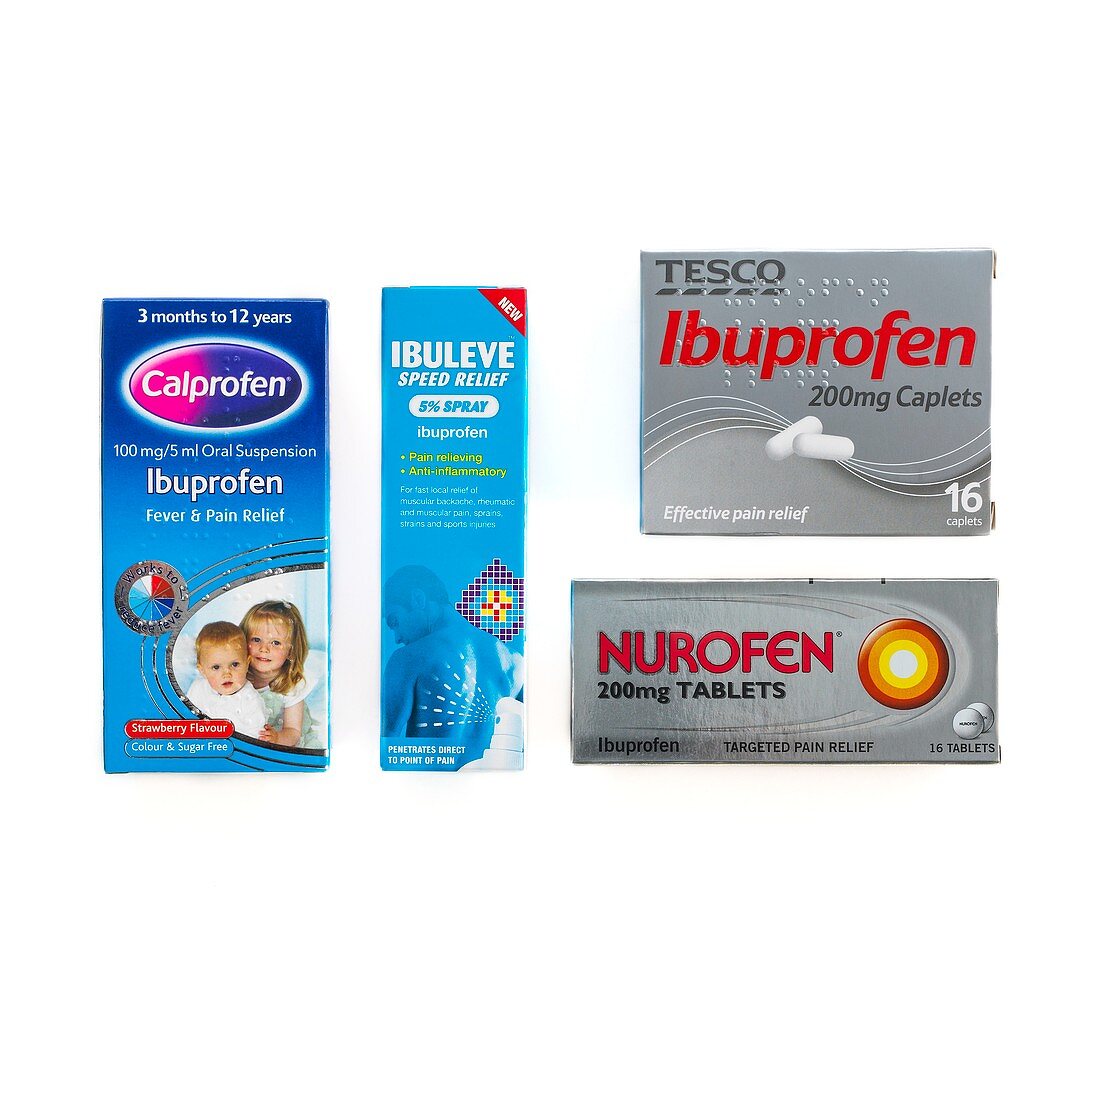 Products containing ibuprofen